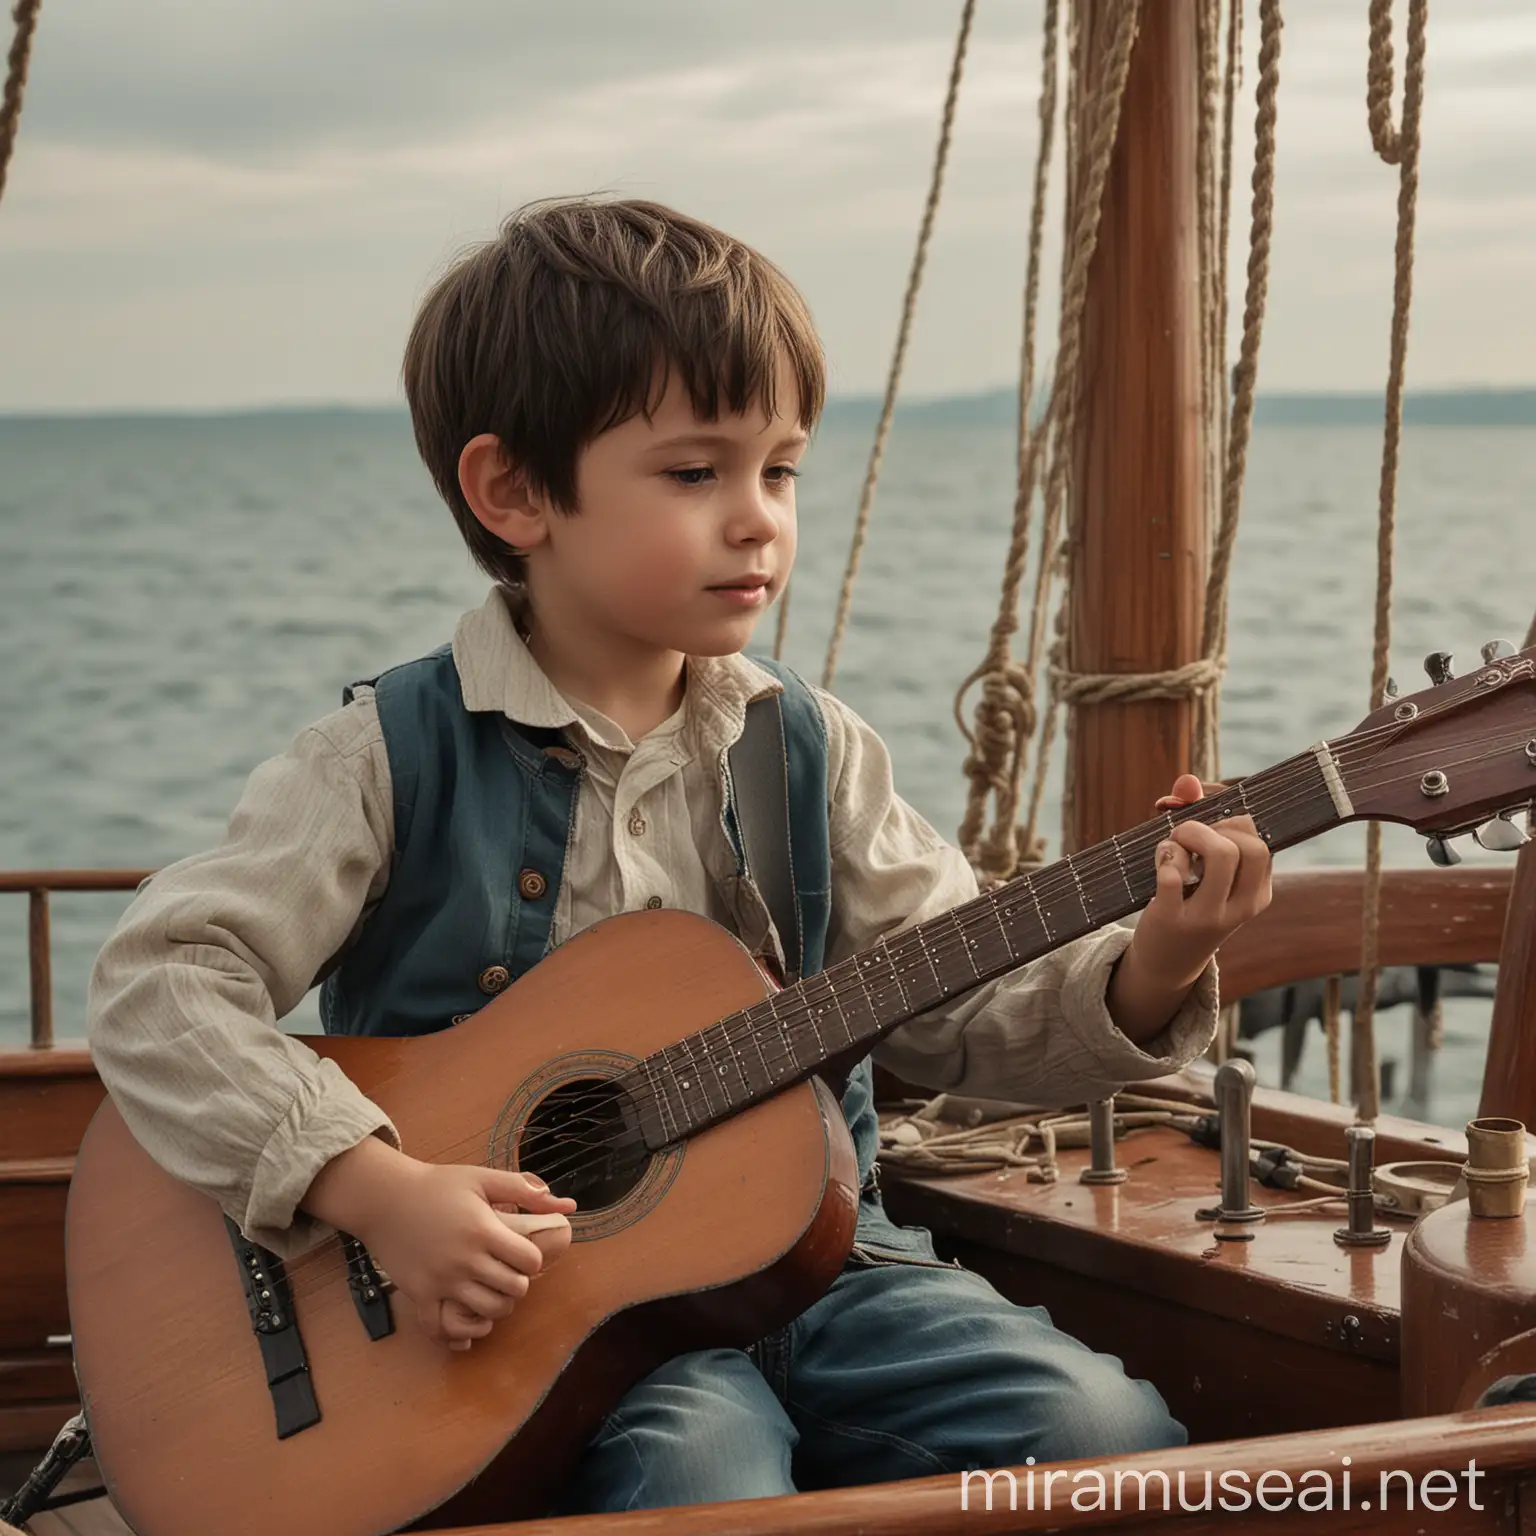 Young Guitarist Performing on Ship Deck